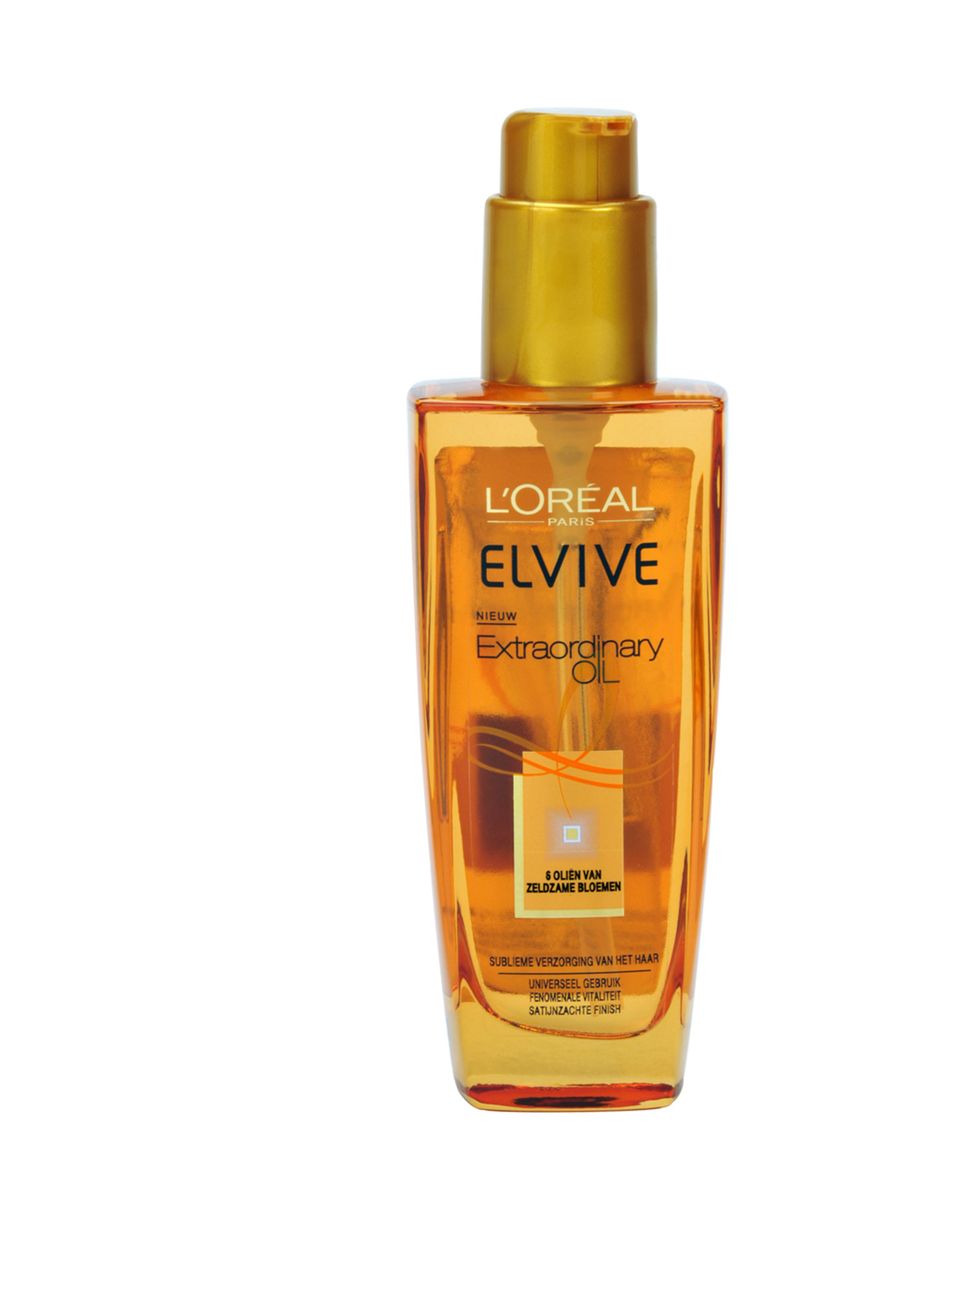 <p><a href="http://www.loreal-paris.co.uk/haircare/elvive-extraordinary-oils/all-hair-types.aspx">L'Oreal Paris Elvive Extraordinary Hair Oil</a> £9.99</p>